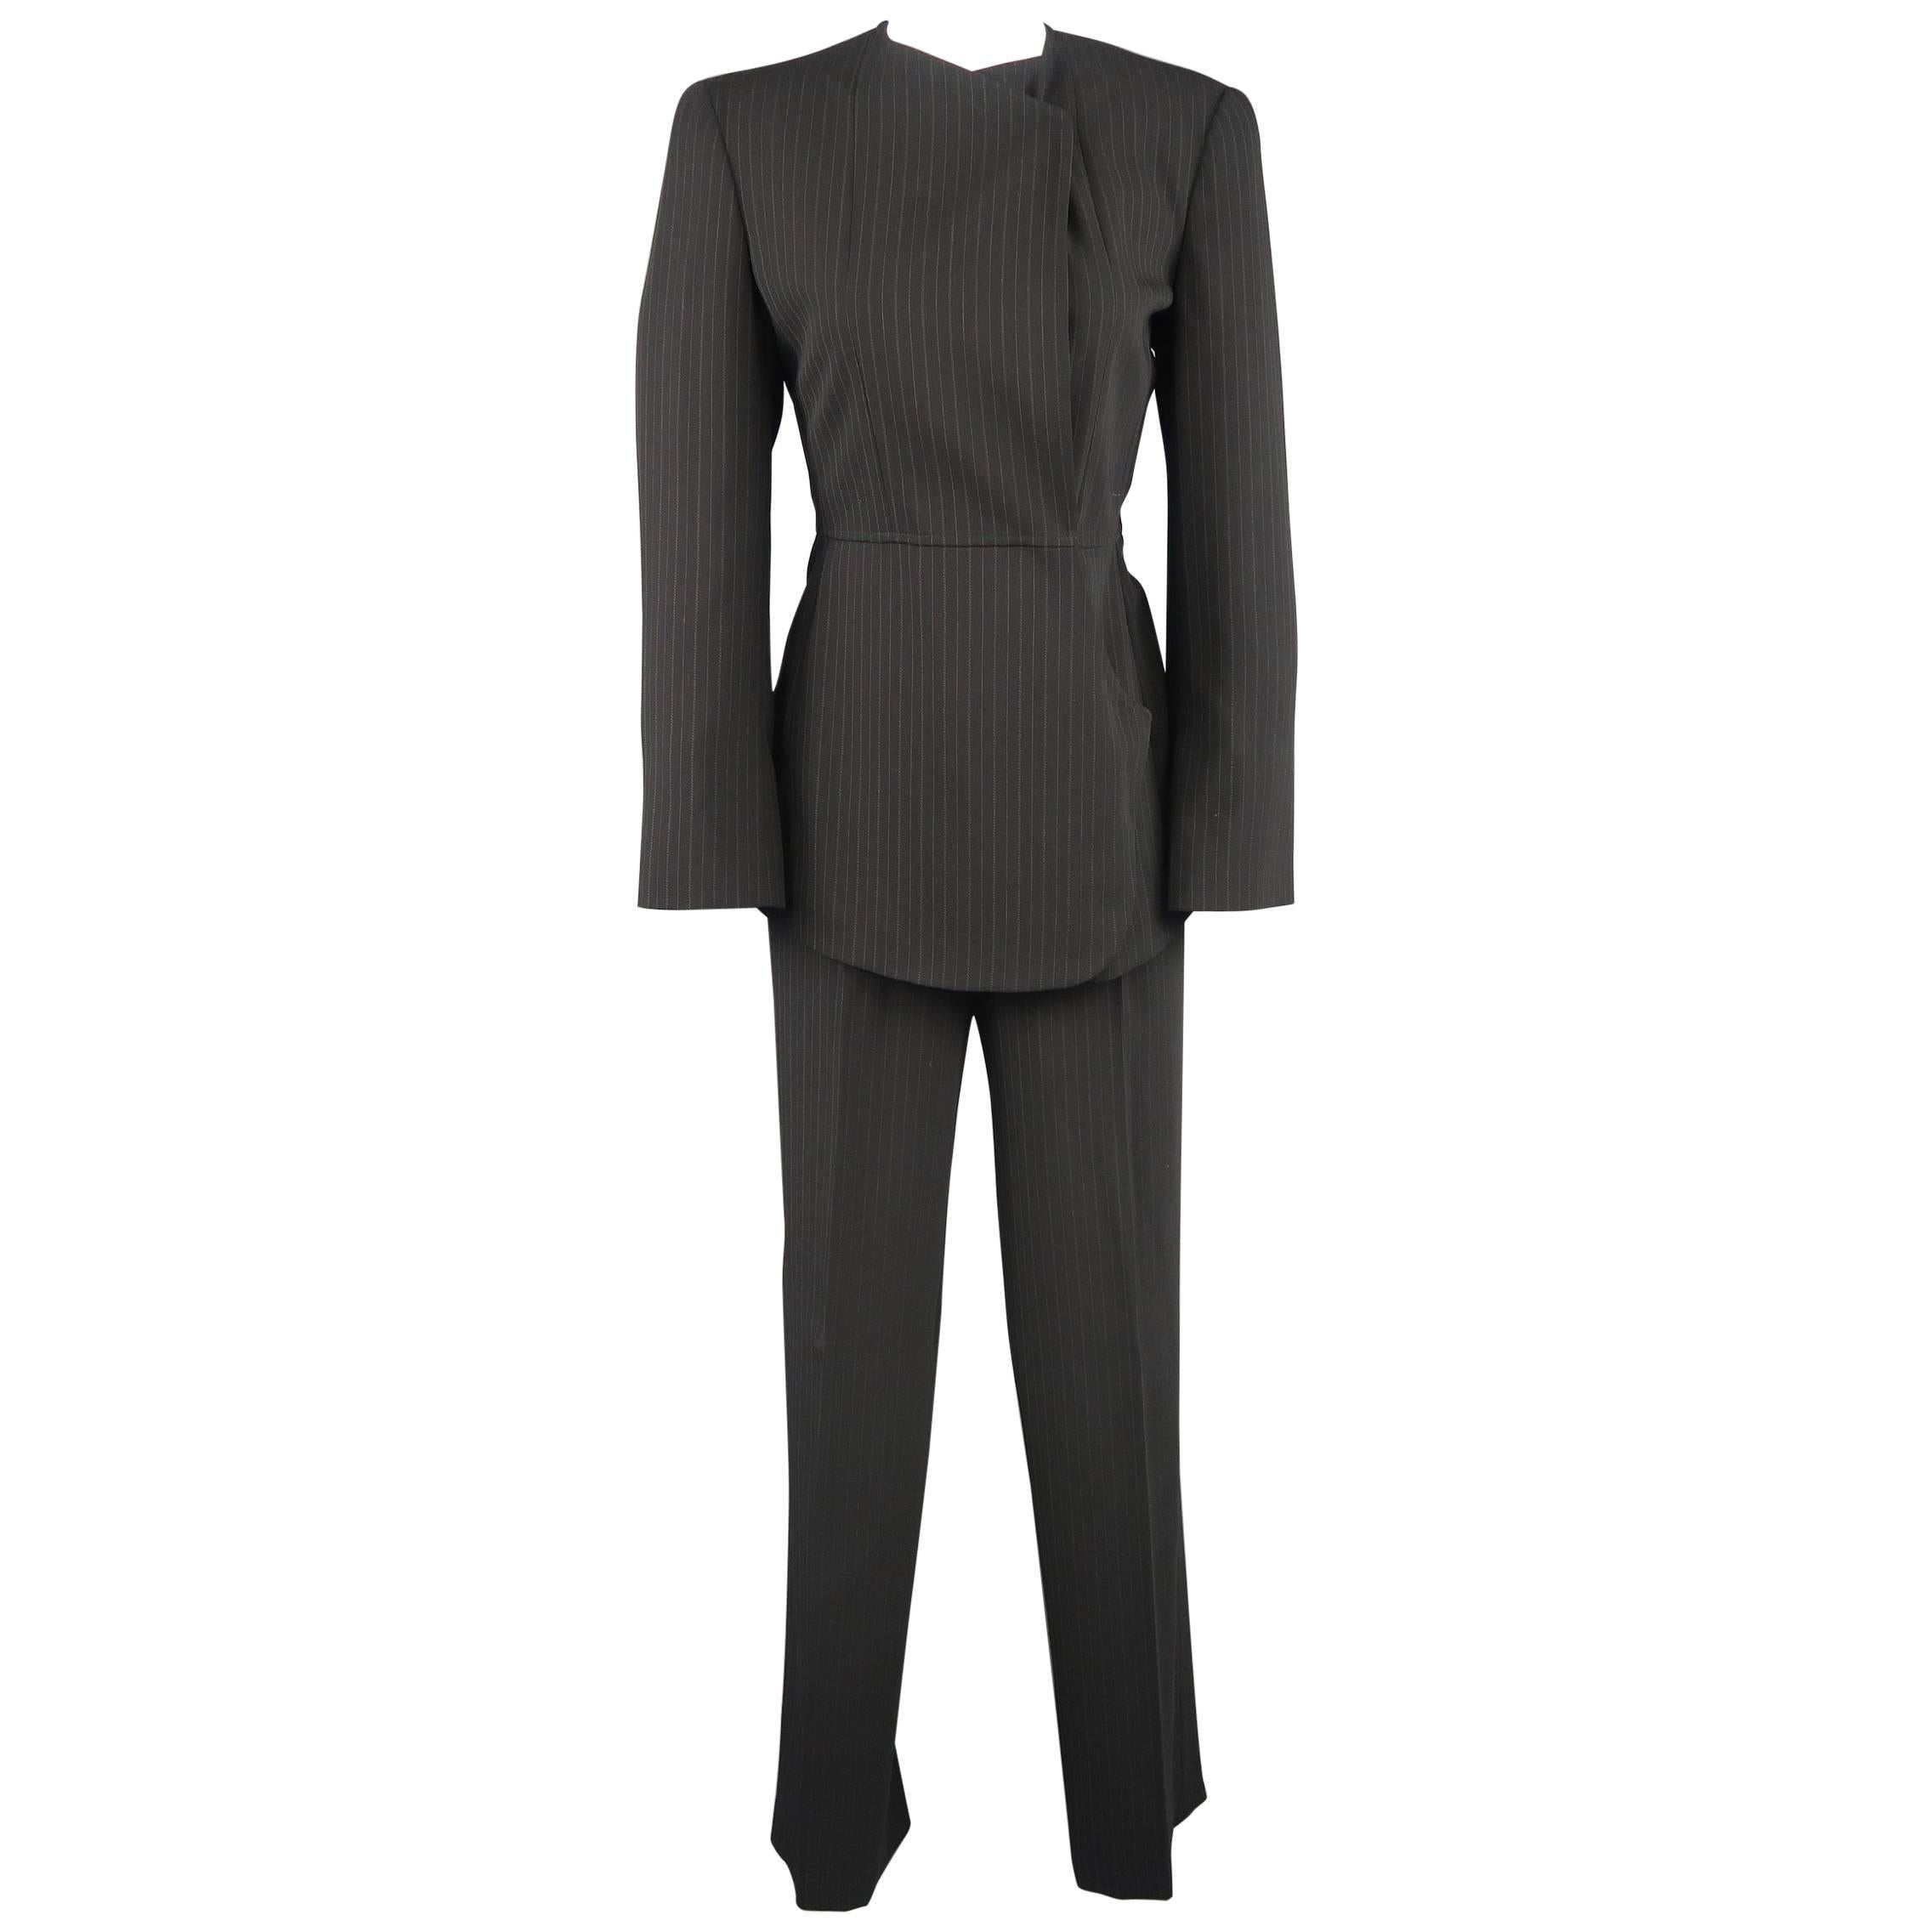 GIORGIO ARMANI Size 6 Black Pinstripe Wool Double Breasted Pants Suit